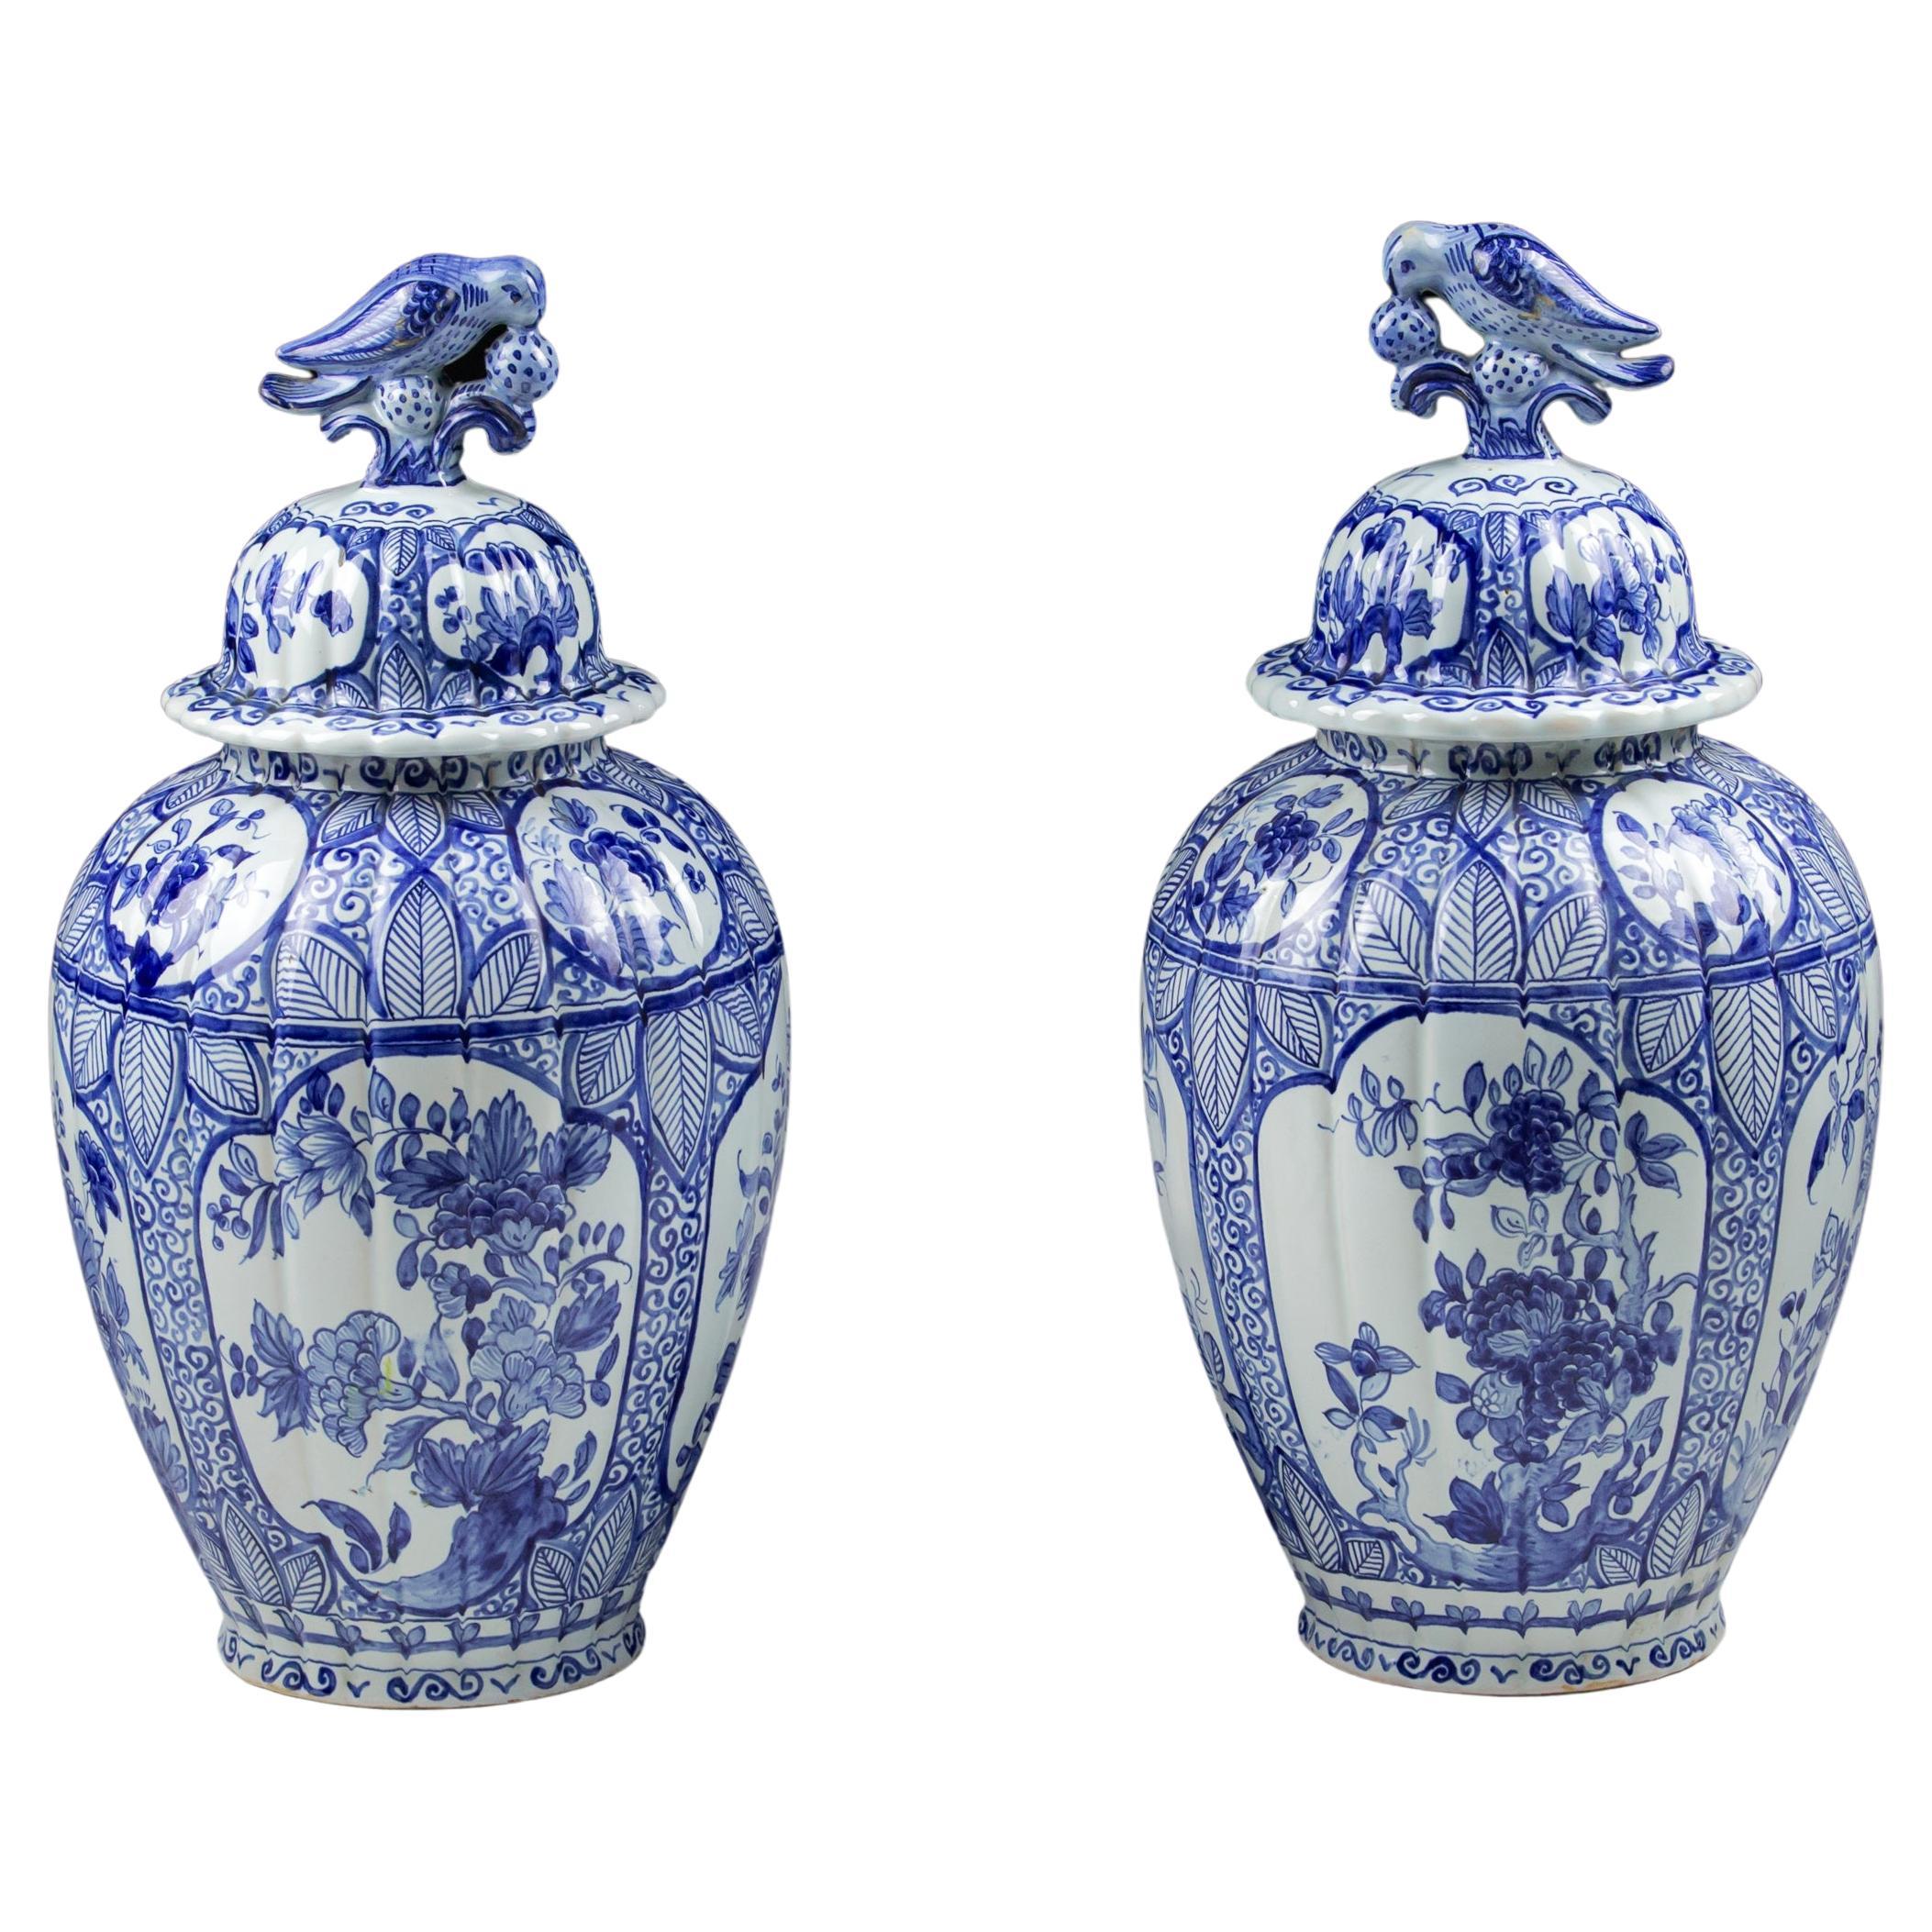 Pair of Early 20th Century Covered Delft Desvres Vase